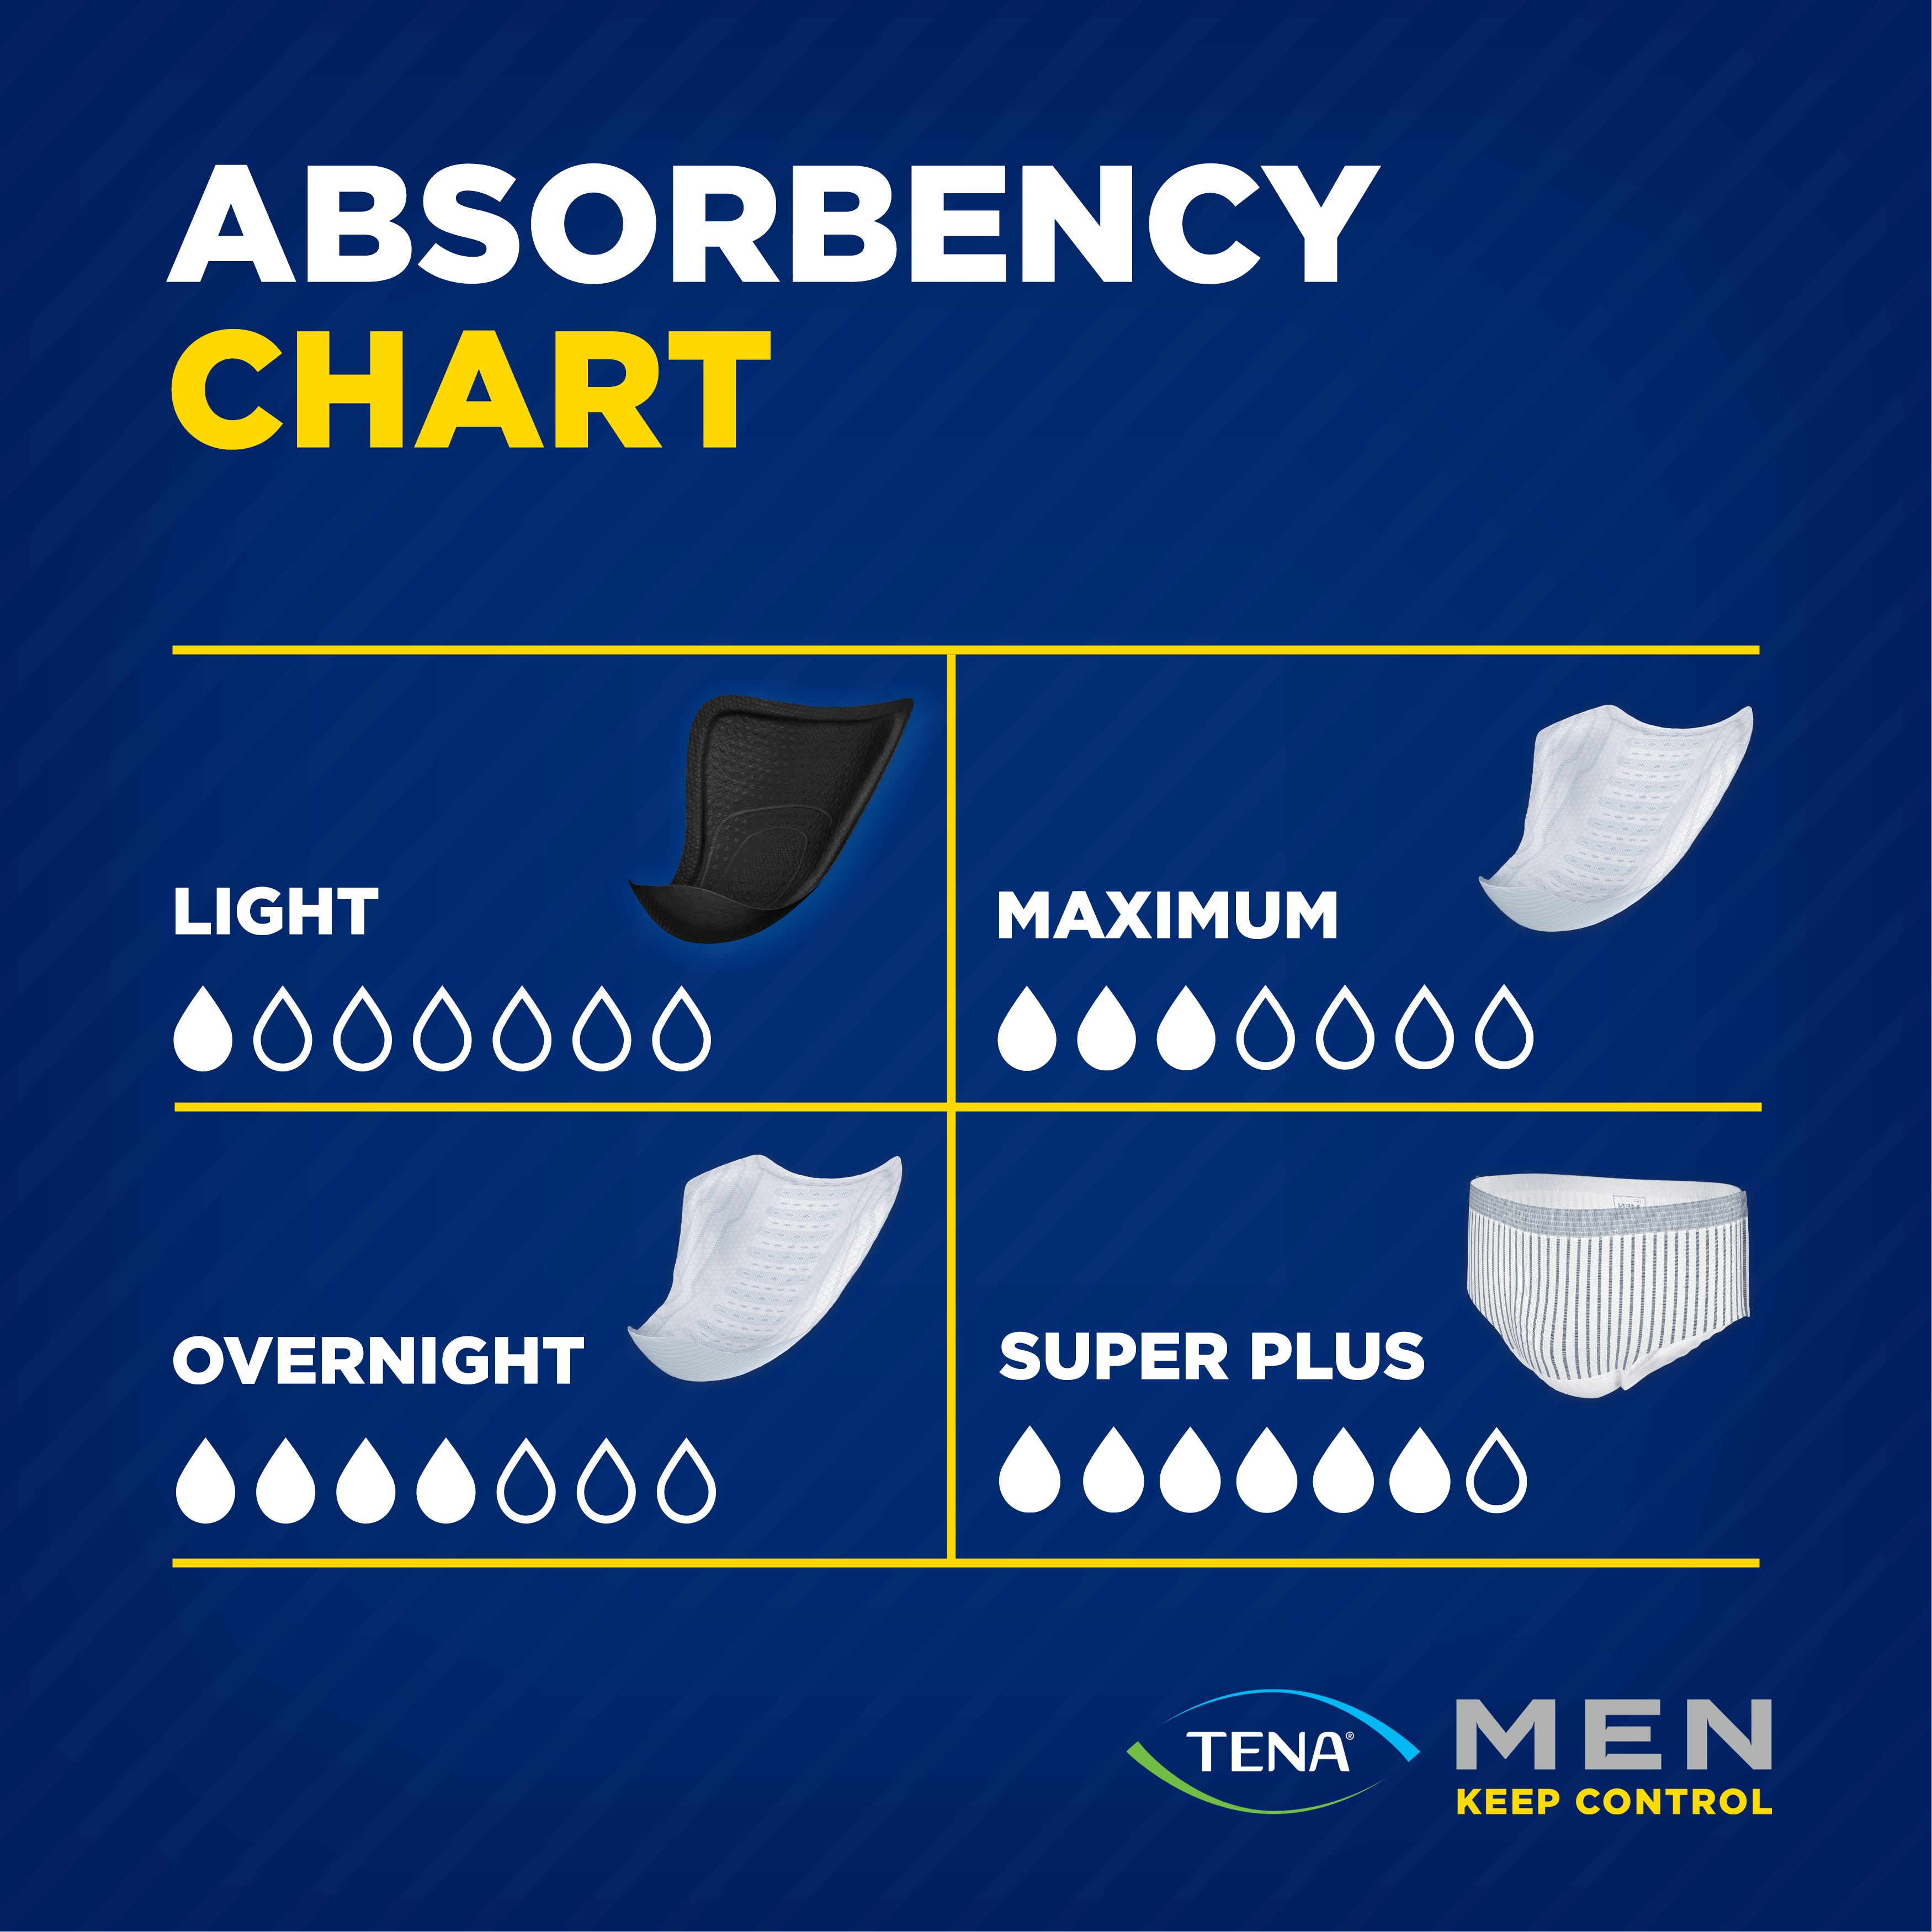 An image of an absorbency chart with maximum as three out of seven drops